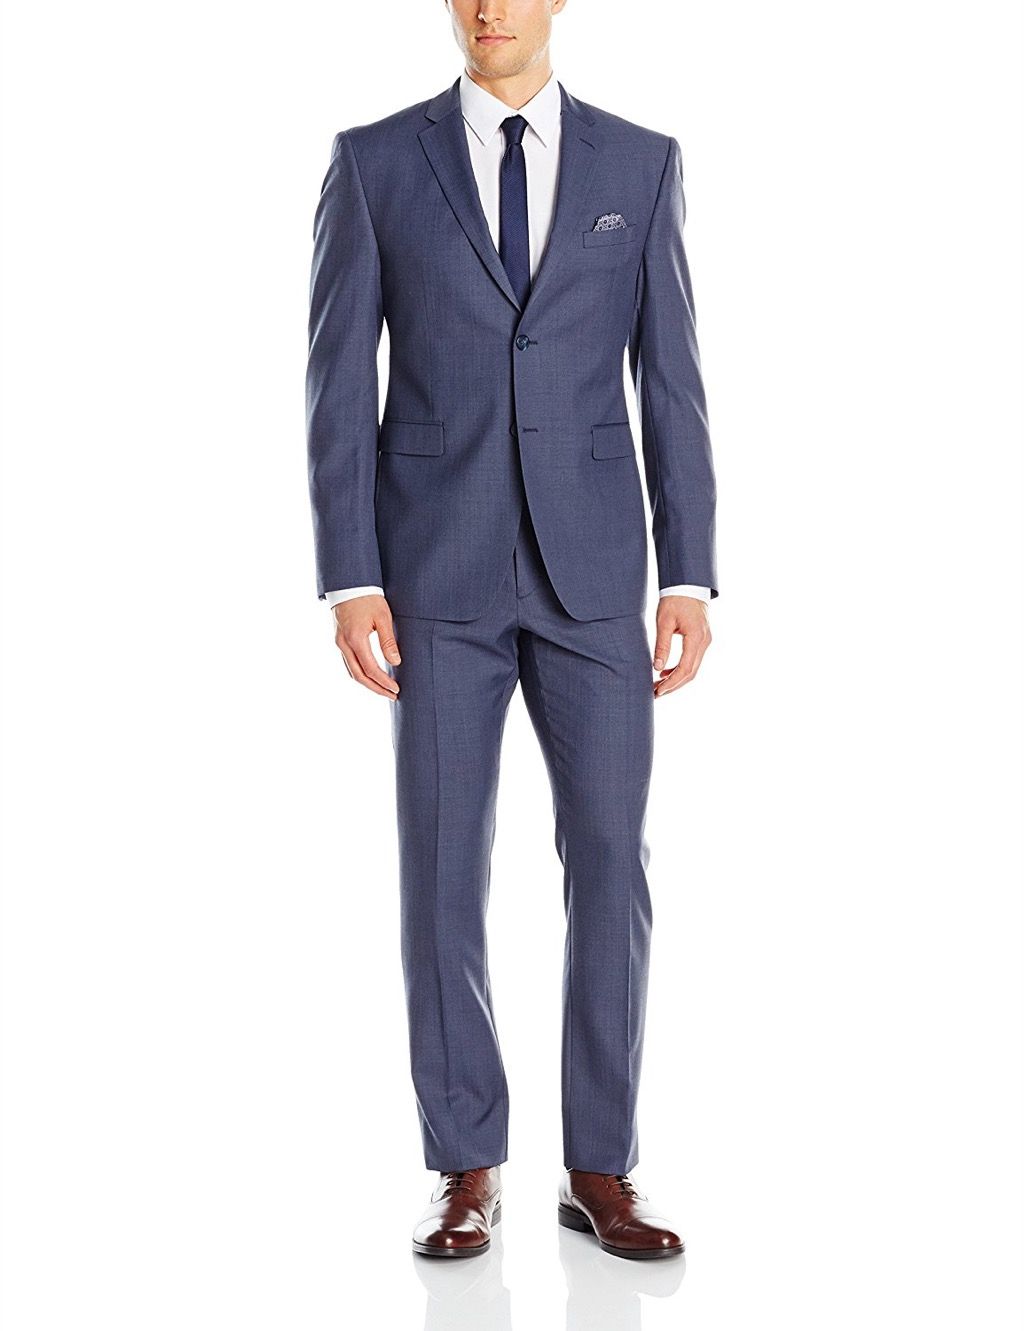 Suit ng Amazon